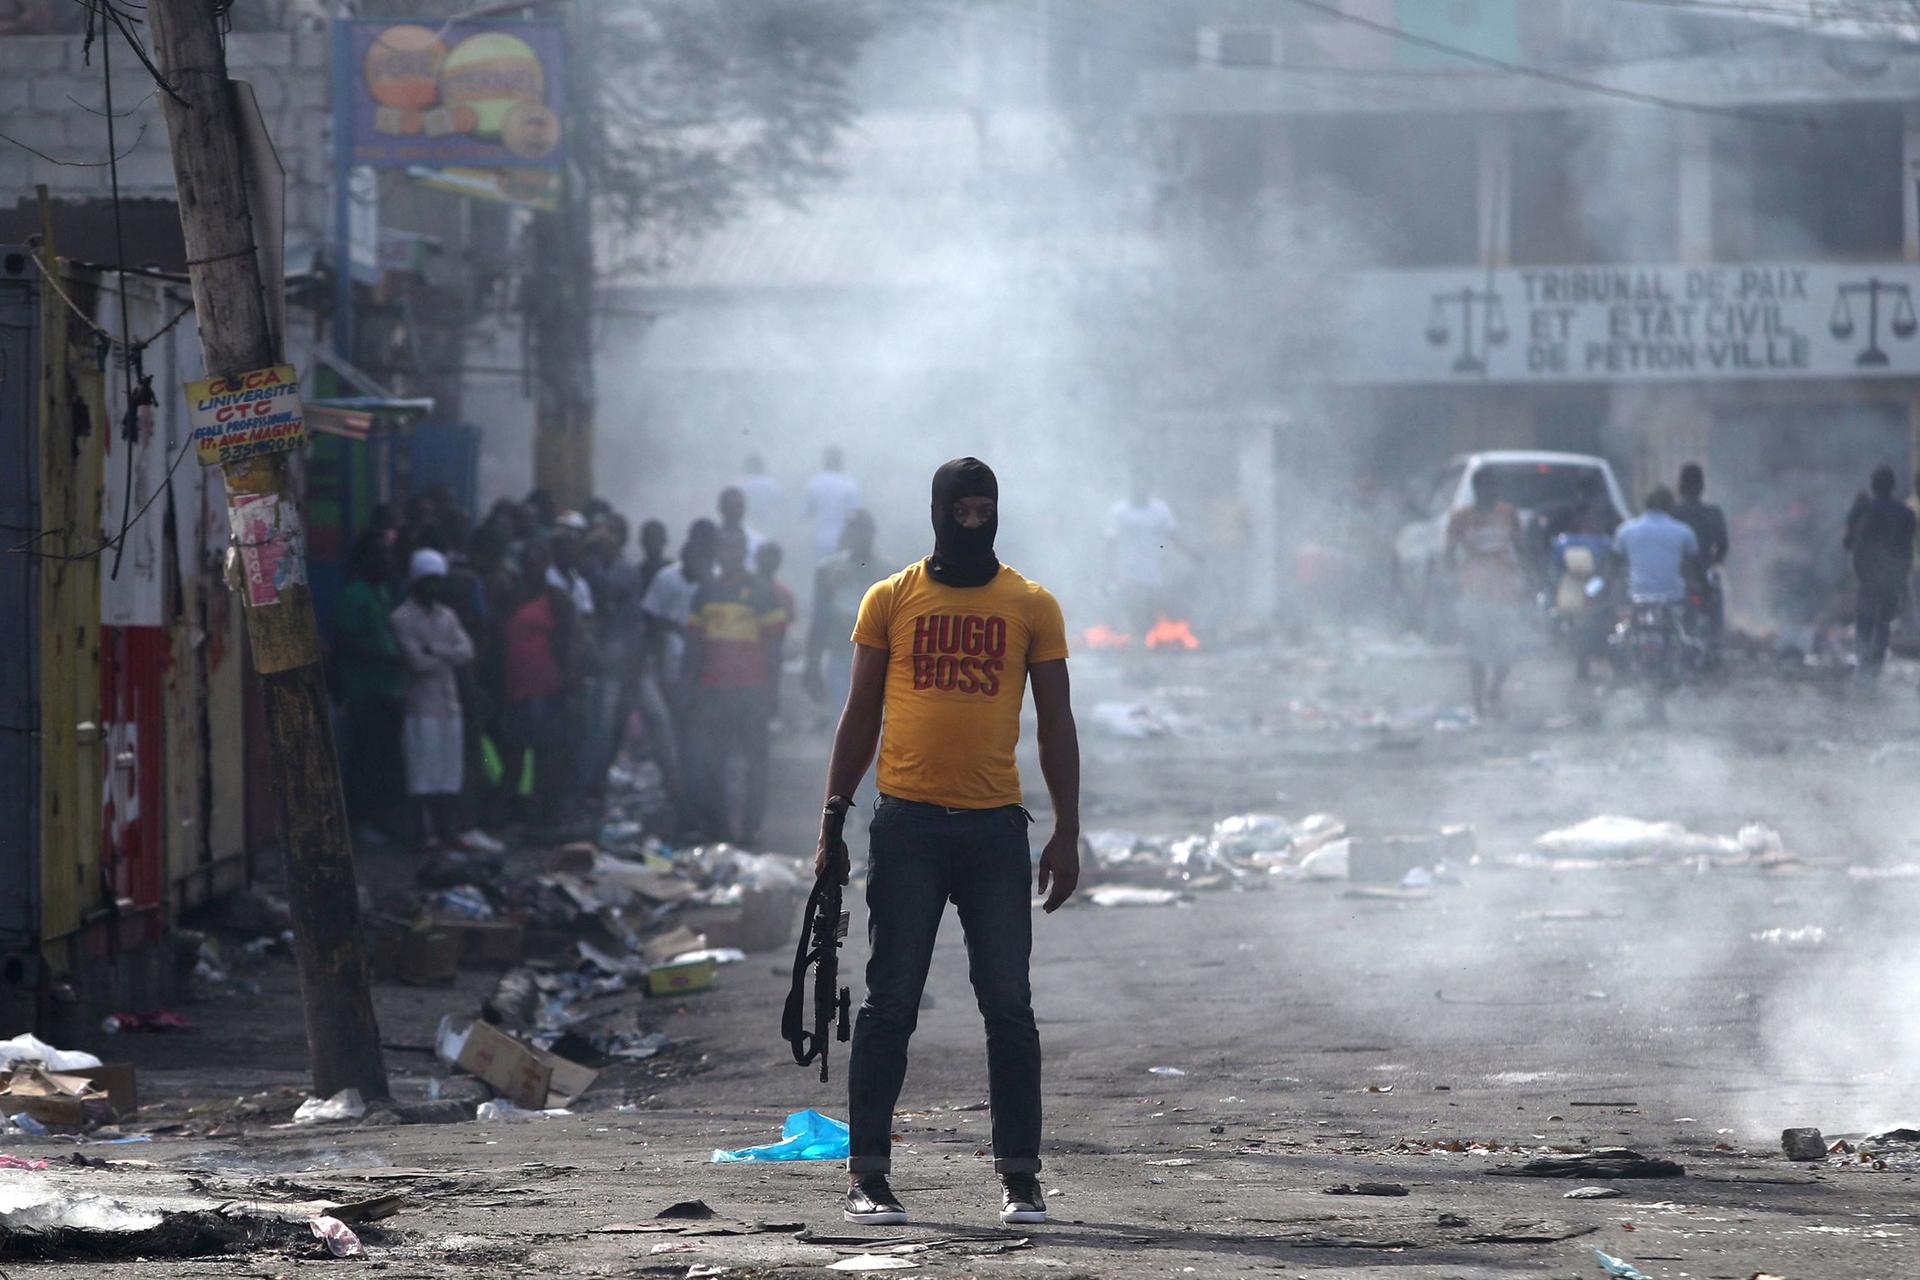 A man is shown holding a weapon, wearing a yellow Hugo Boss t-shirt, next to burning barricades.